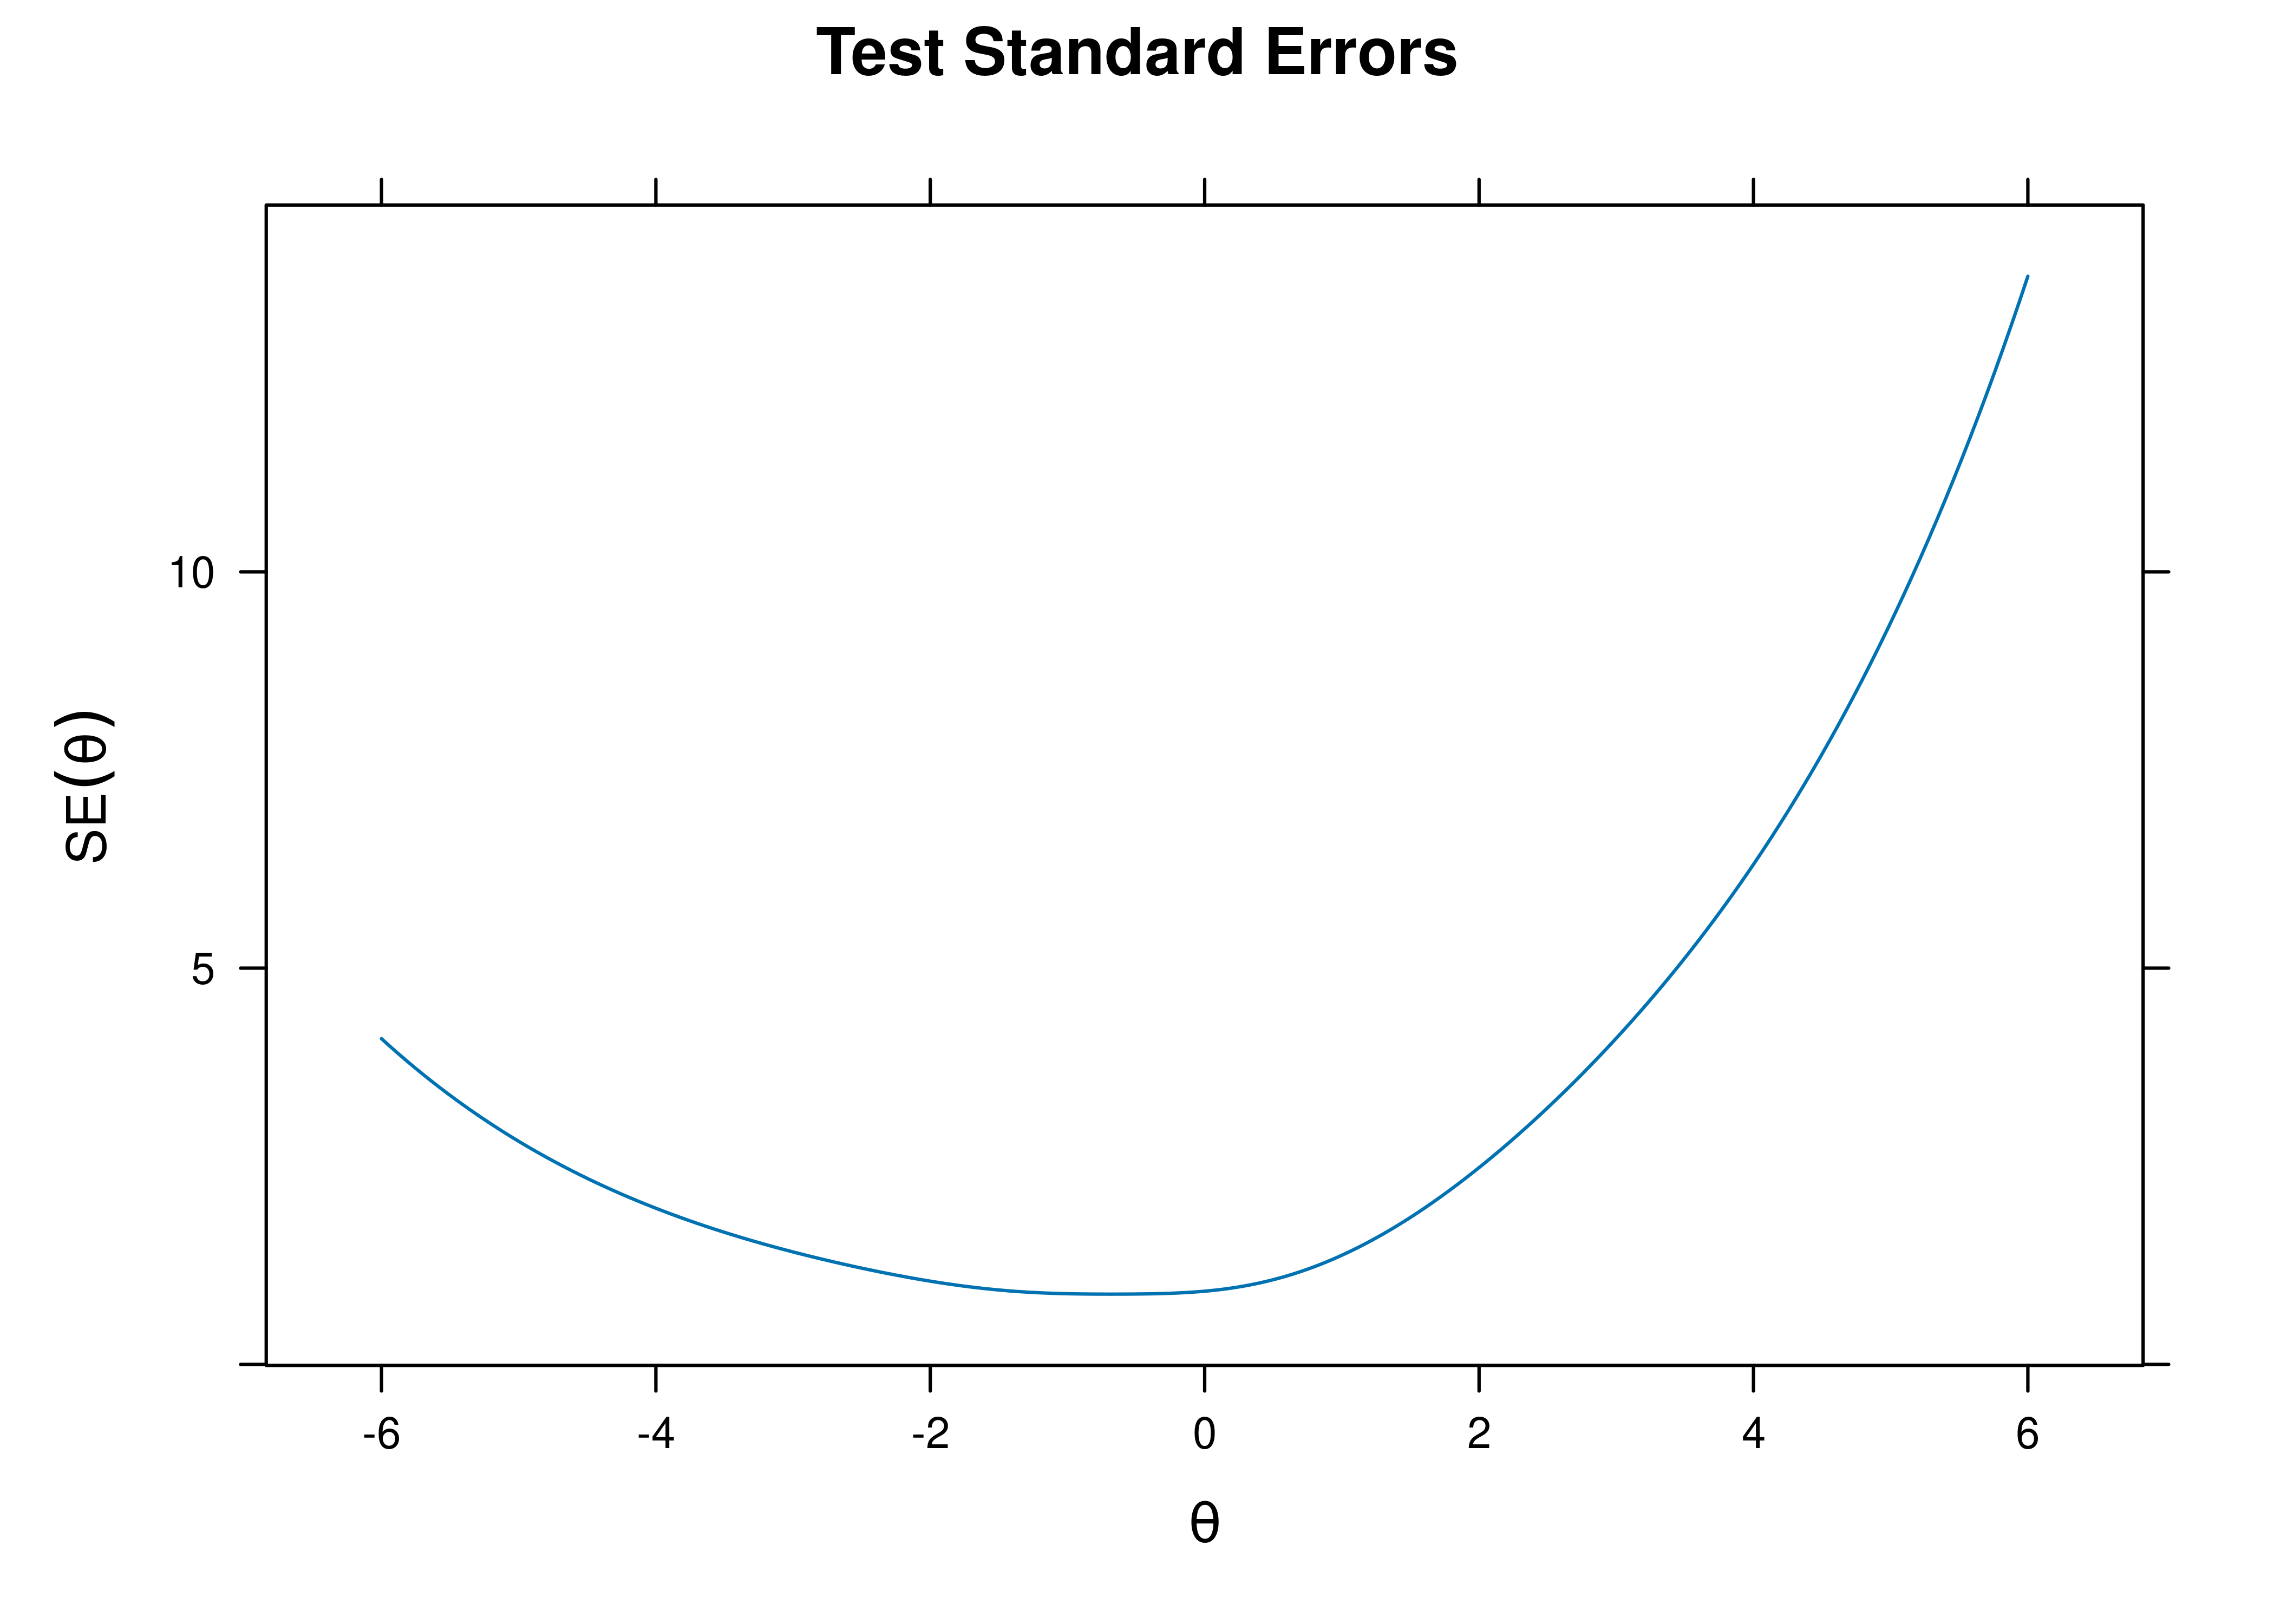 Test Standard Error of Measurement From Three-Parameter Logistic Item Response Theory Model.